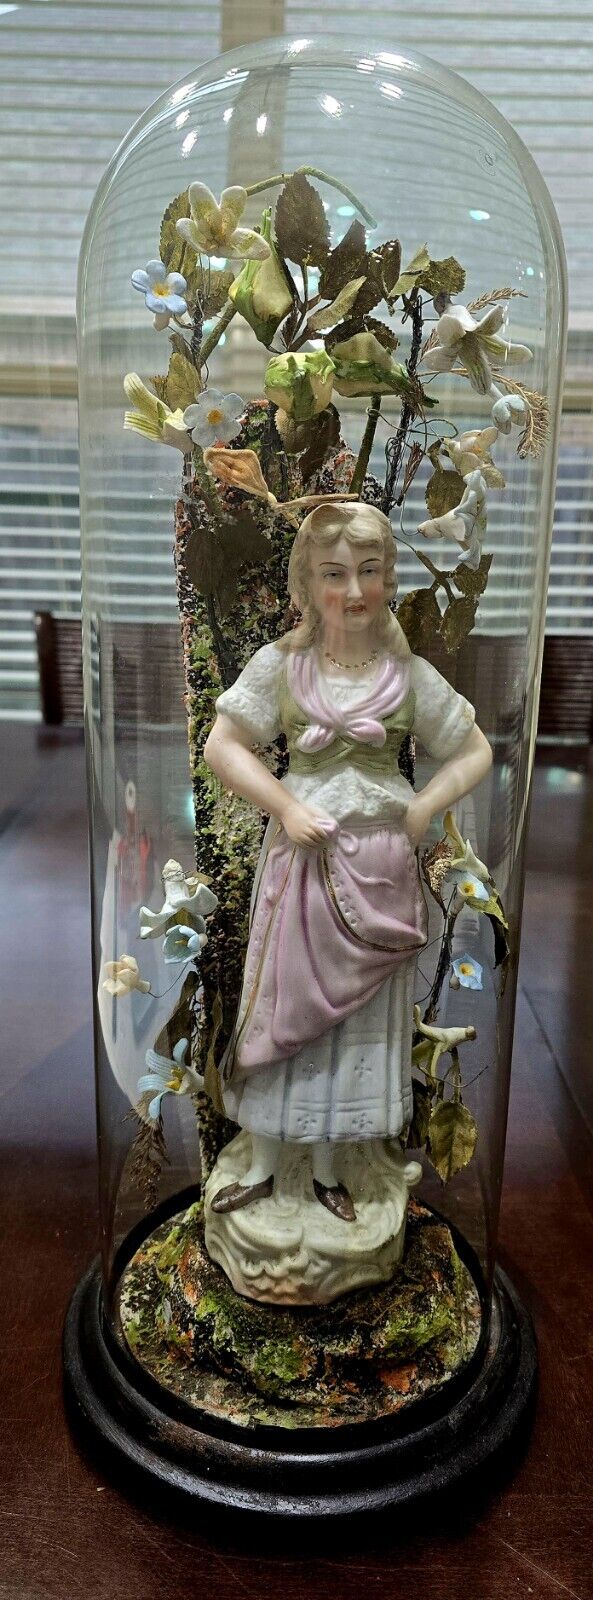 Antique Victorian Glass Dome Ceramic Girl Surrounded By Flowers  Late 1800s